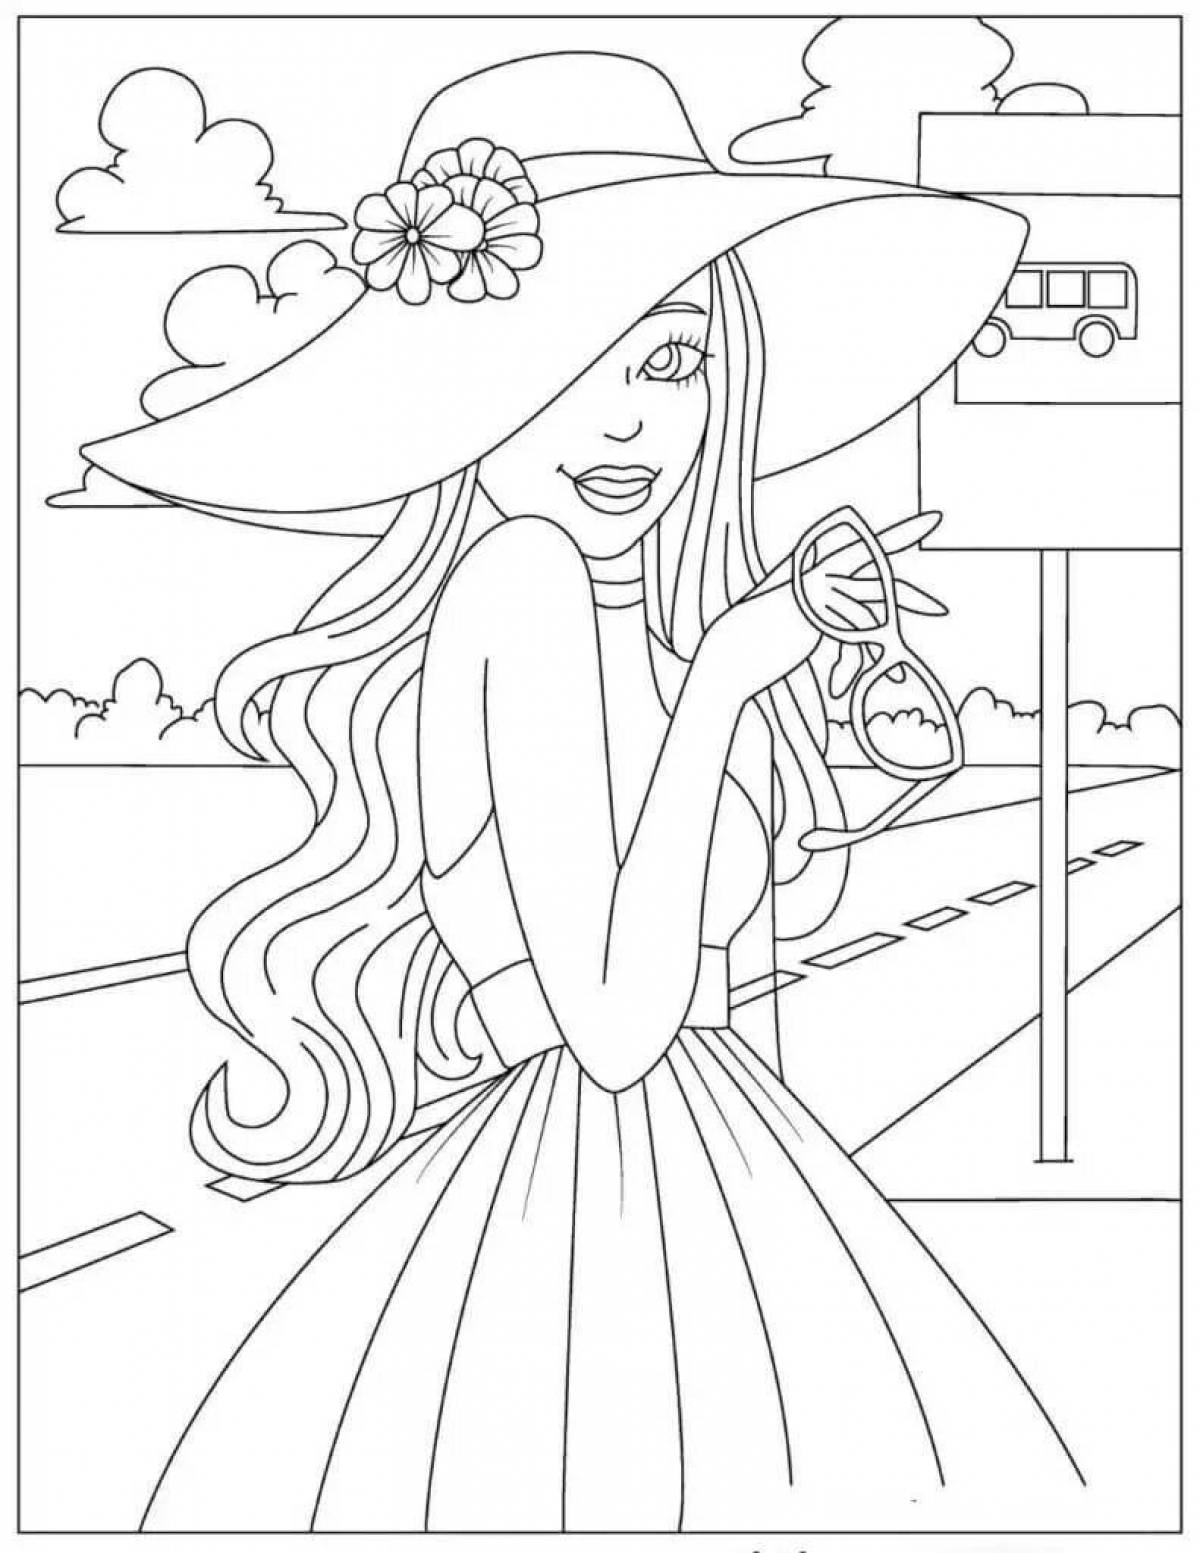 Playful barbie coloring book for kids 5-6 years old